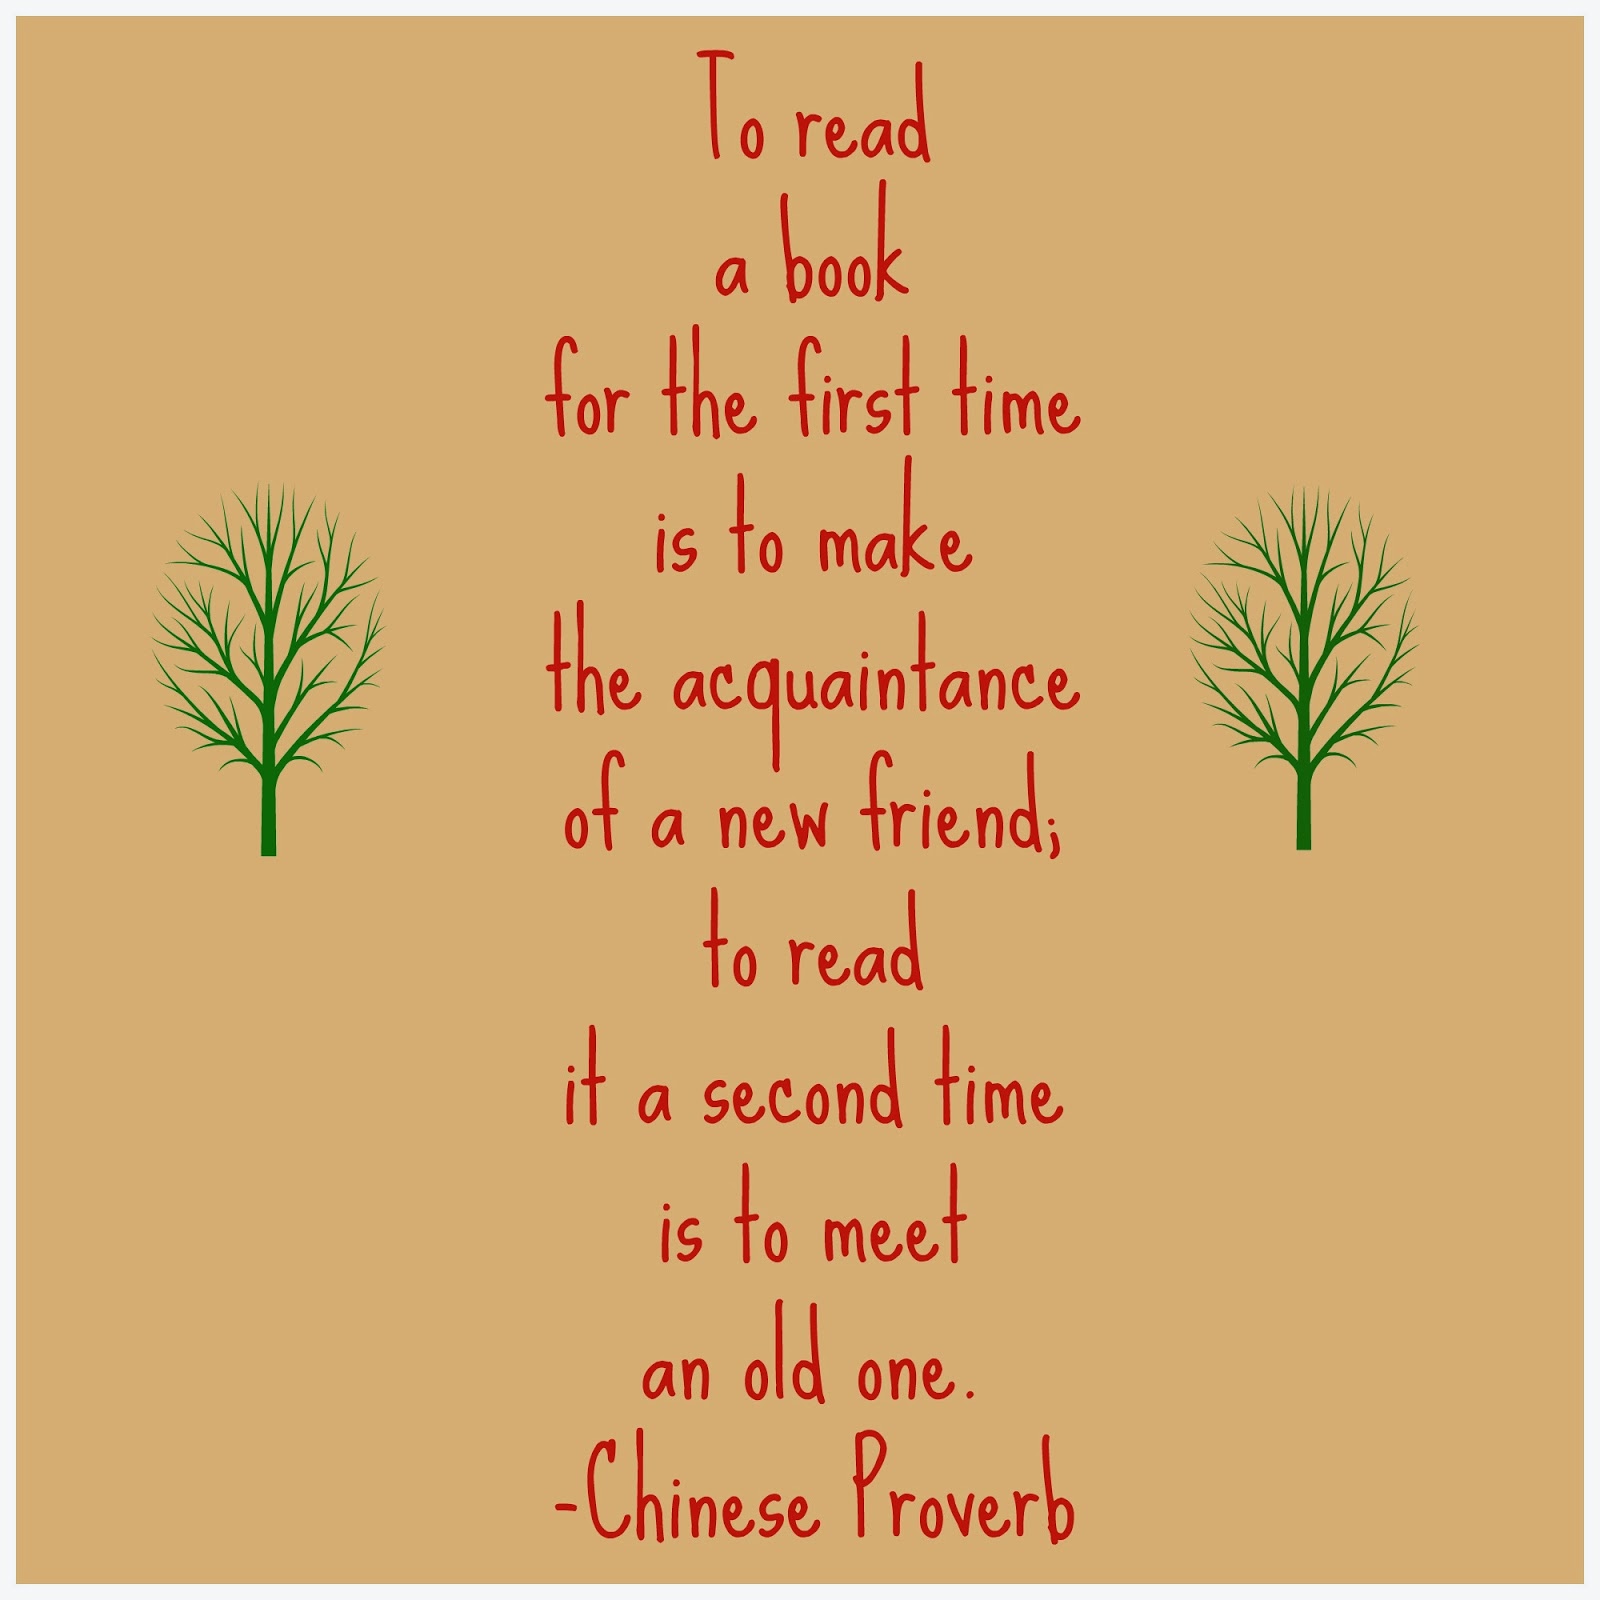 Chinese Sayings Friendship Mississippi library mission a proverb by any